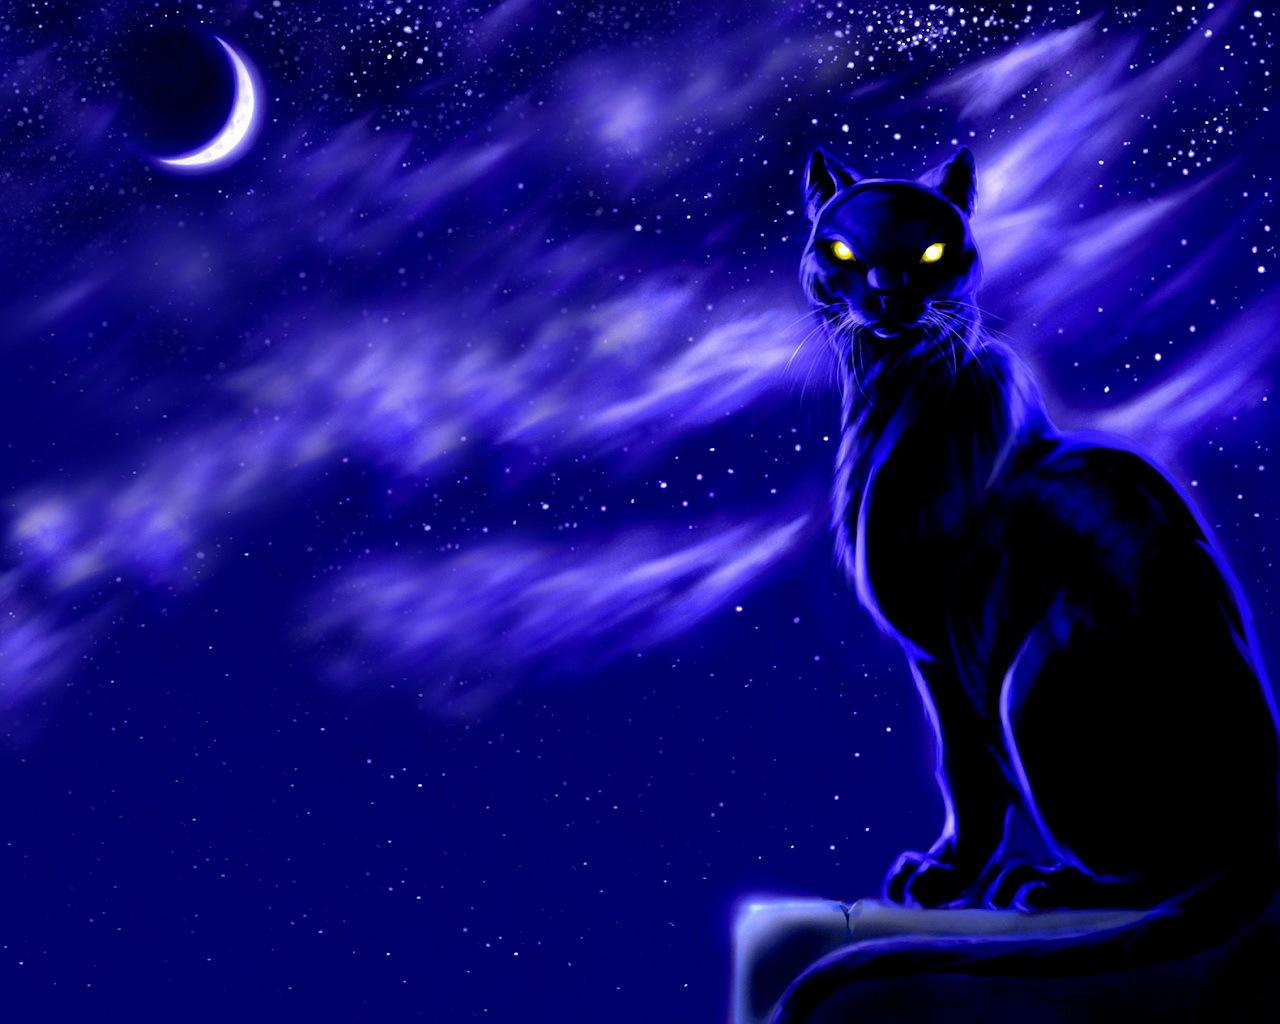 Black cat moon at night wallpaper and image, picture